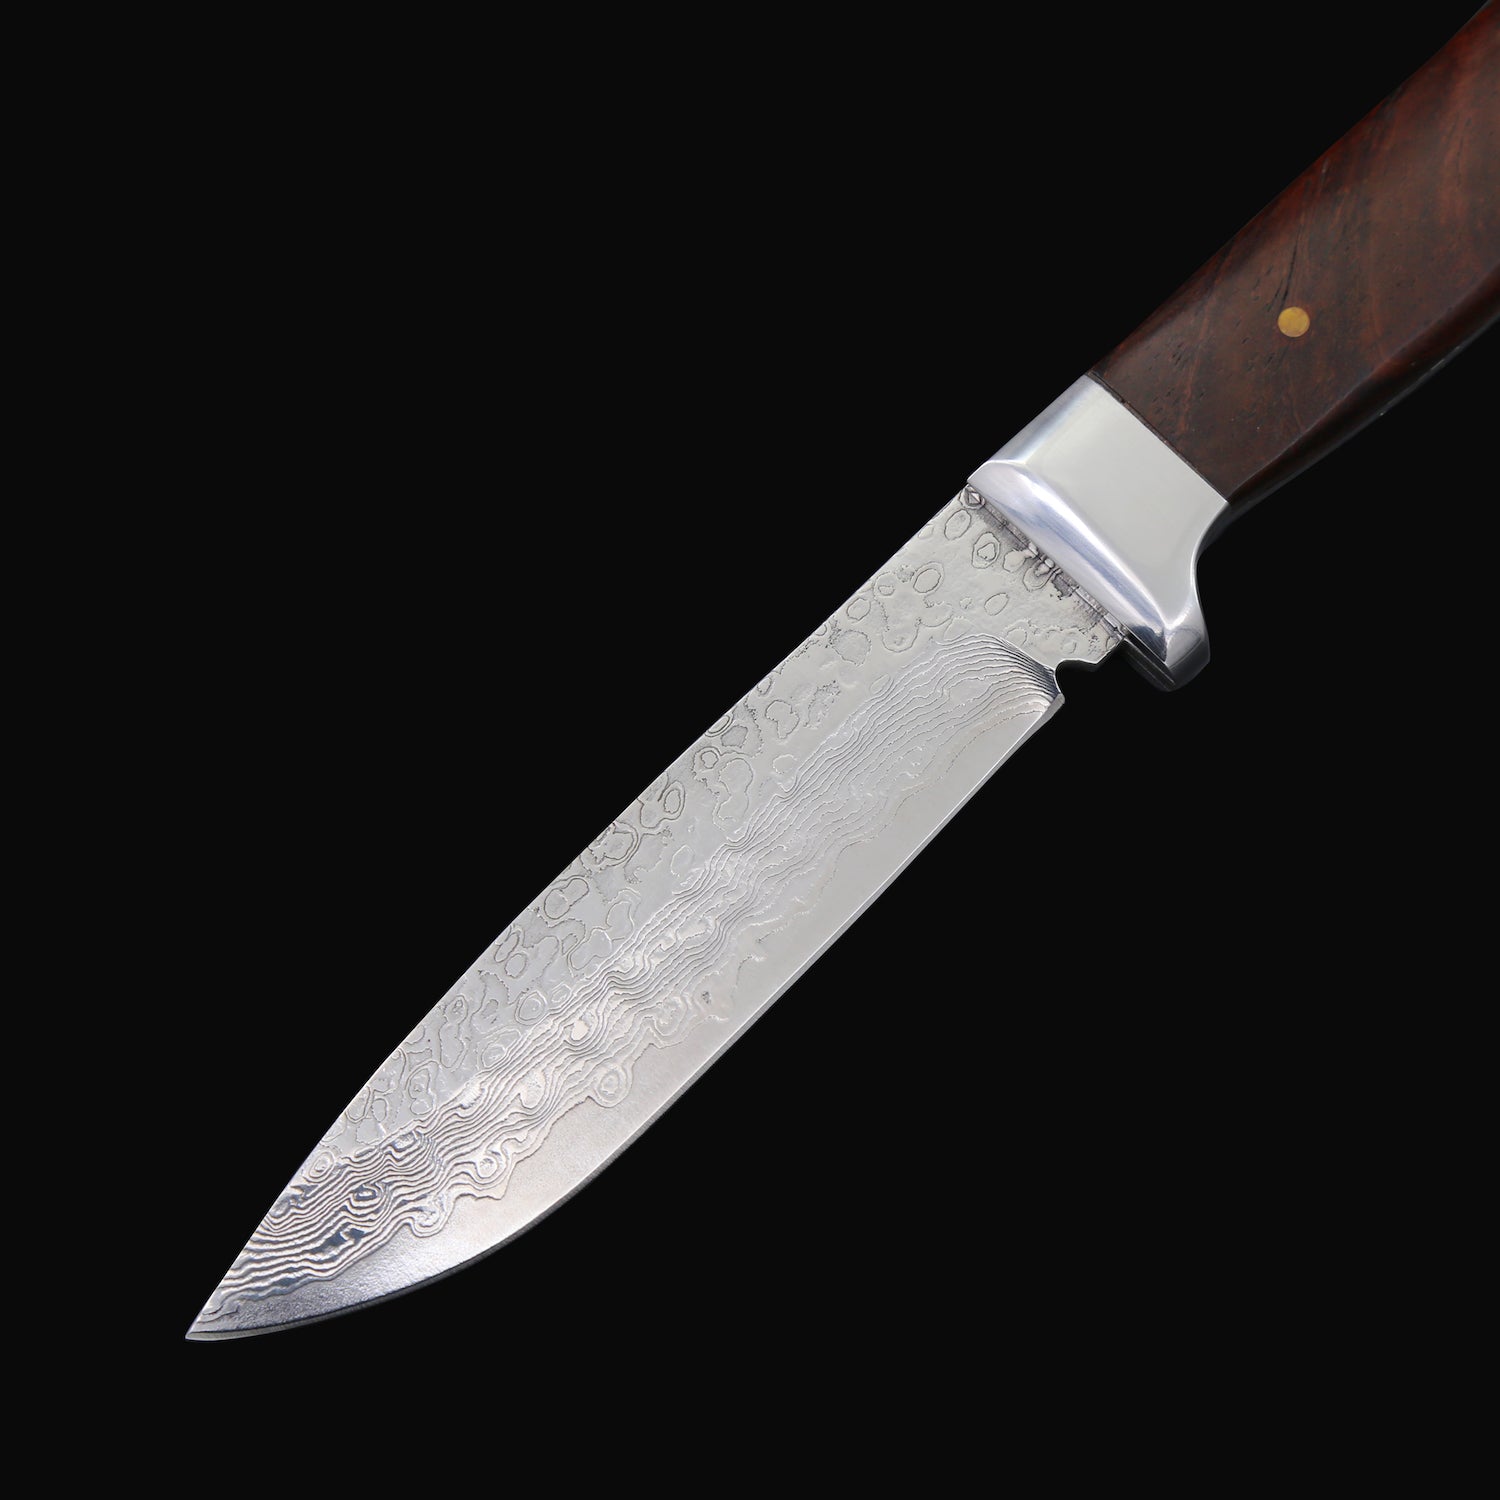 The Path Finder Damascus Steel Fixed Blade